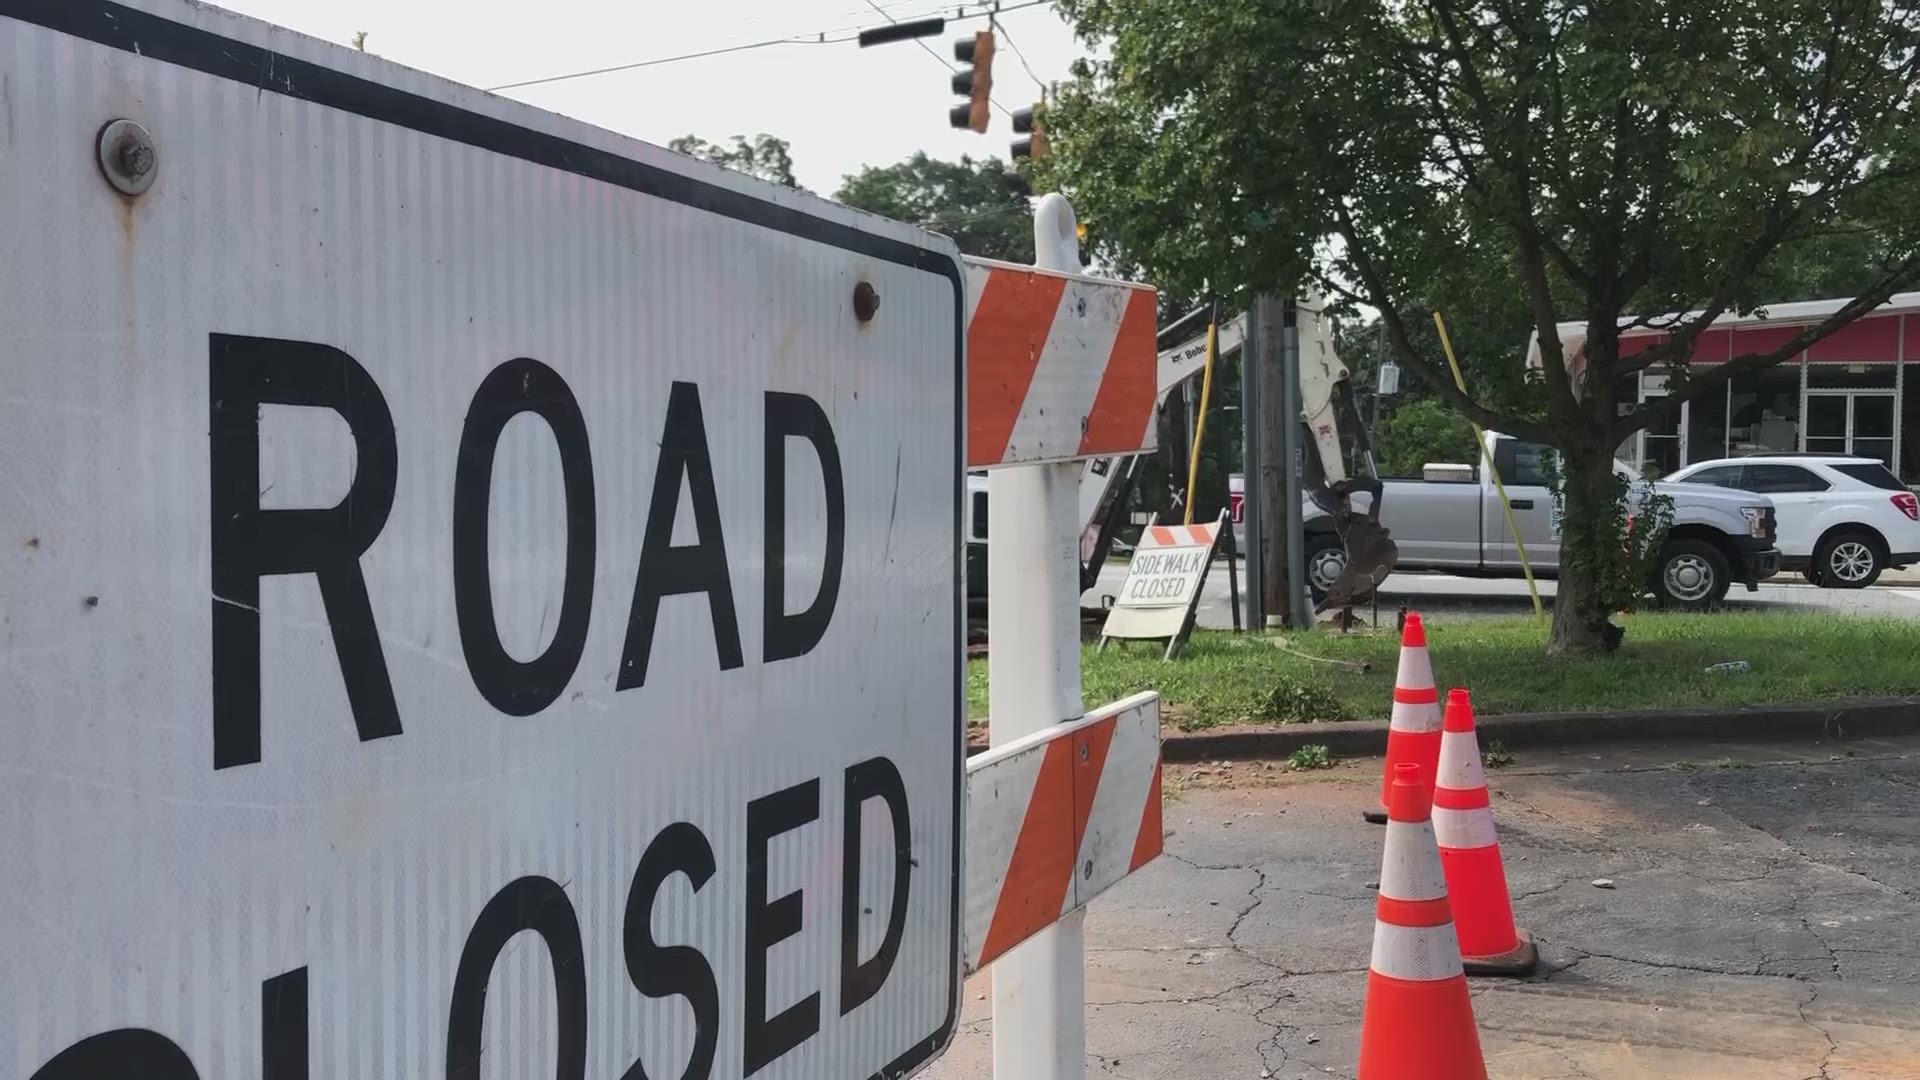 Construction is underway at the intersection of Washington Rd and Semmes St.